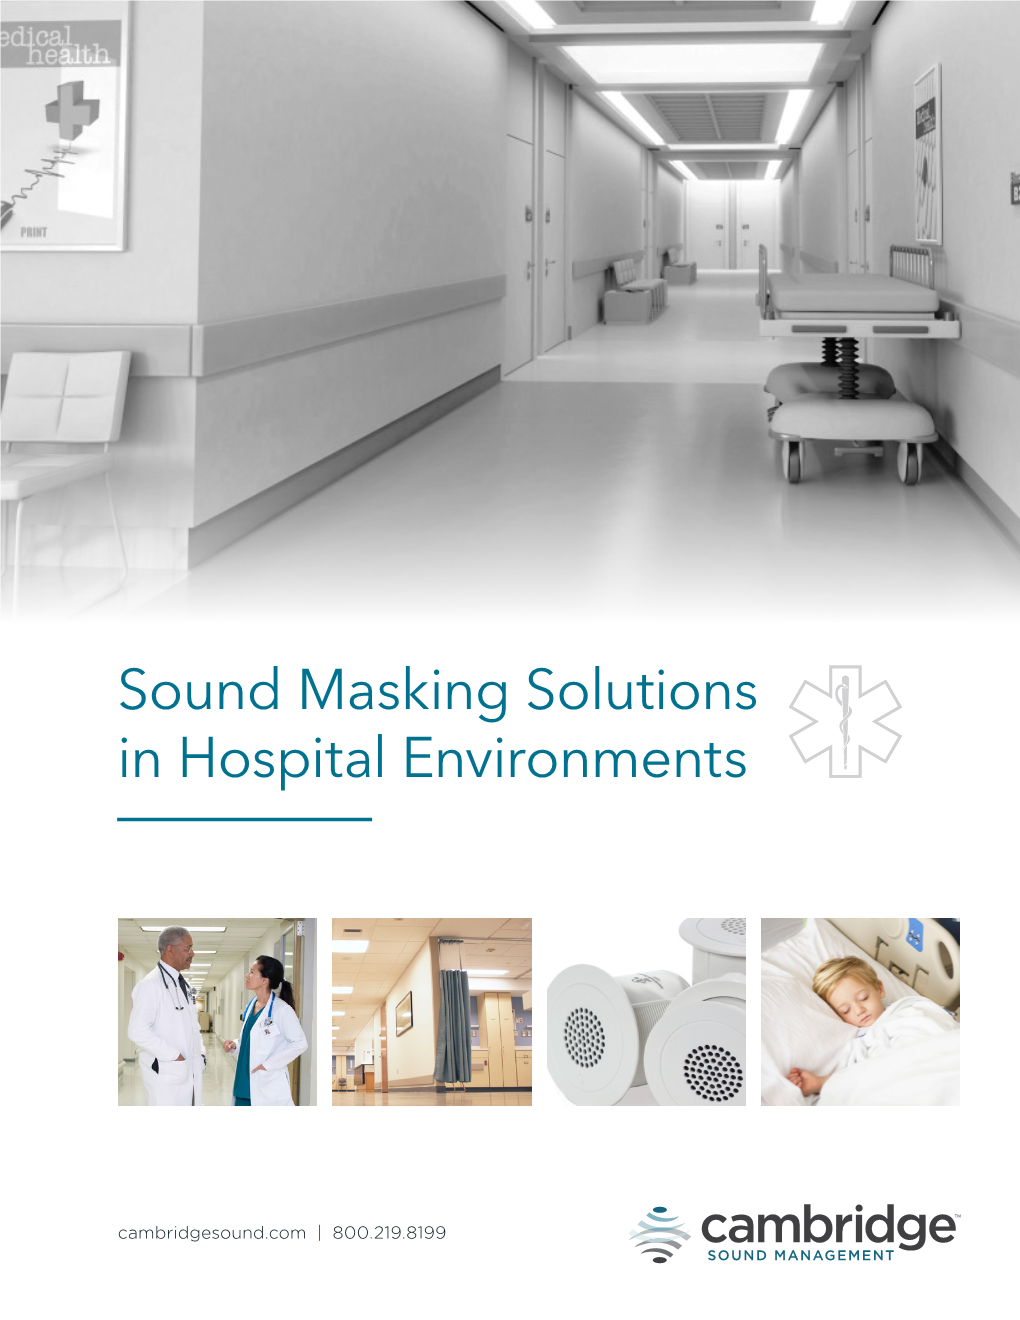 Sound Masking Solutions in Hospital Environments